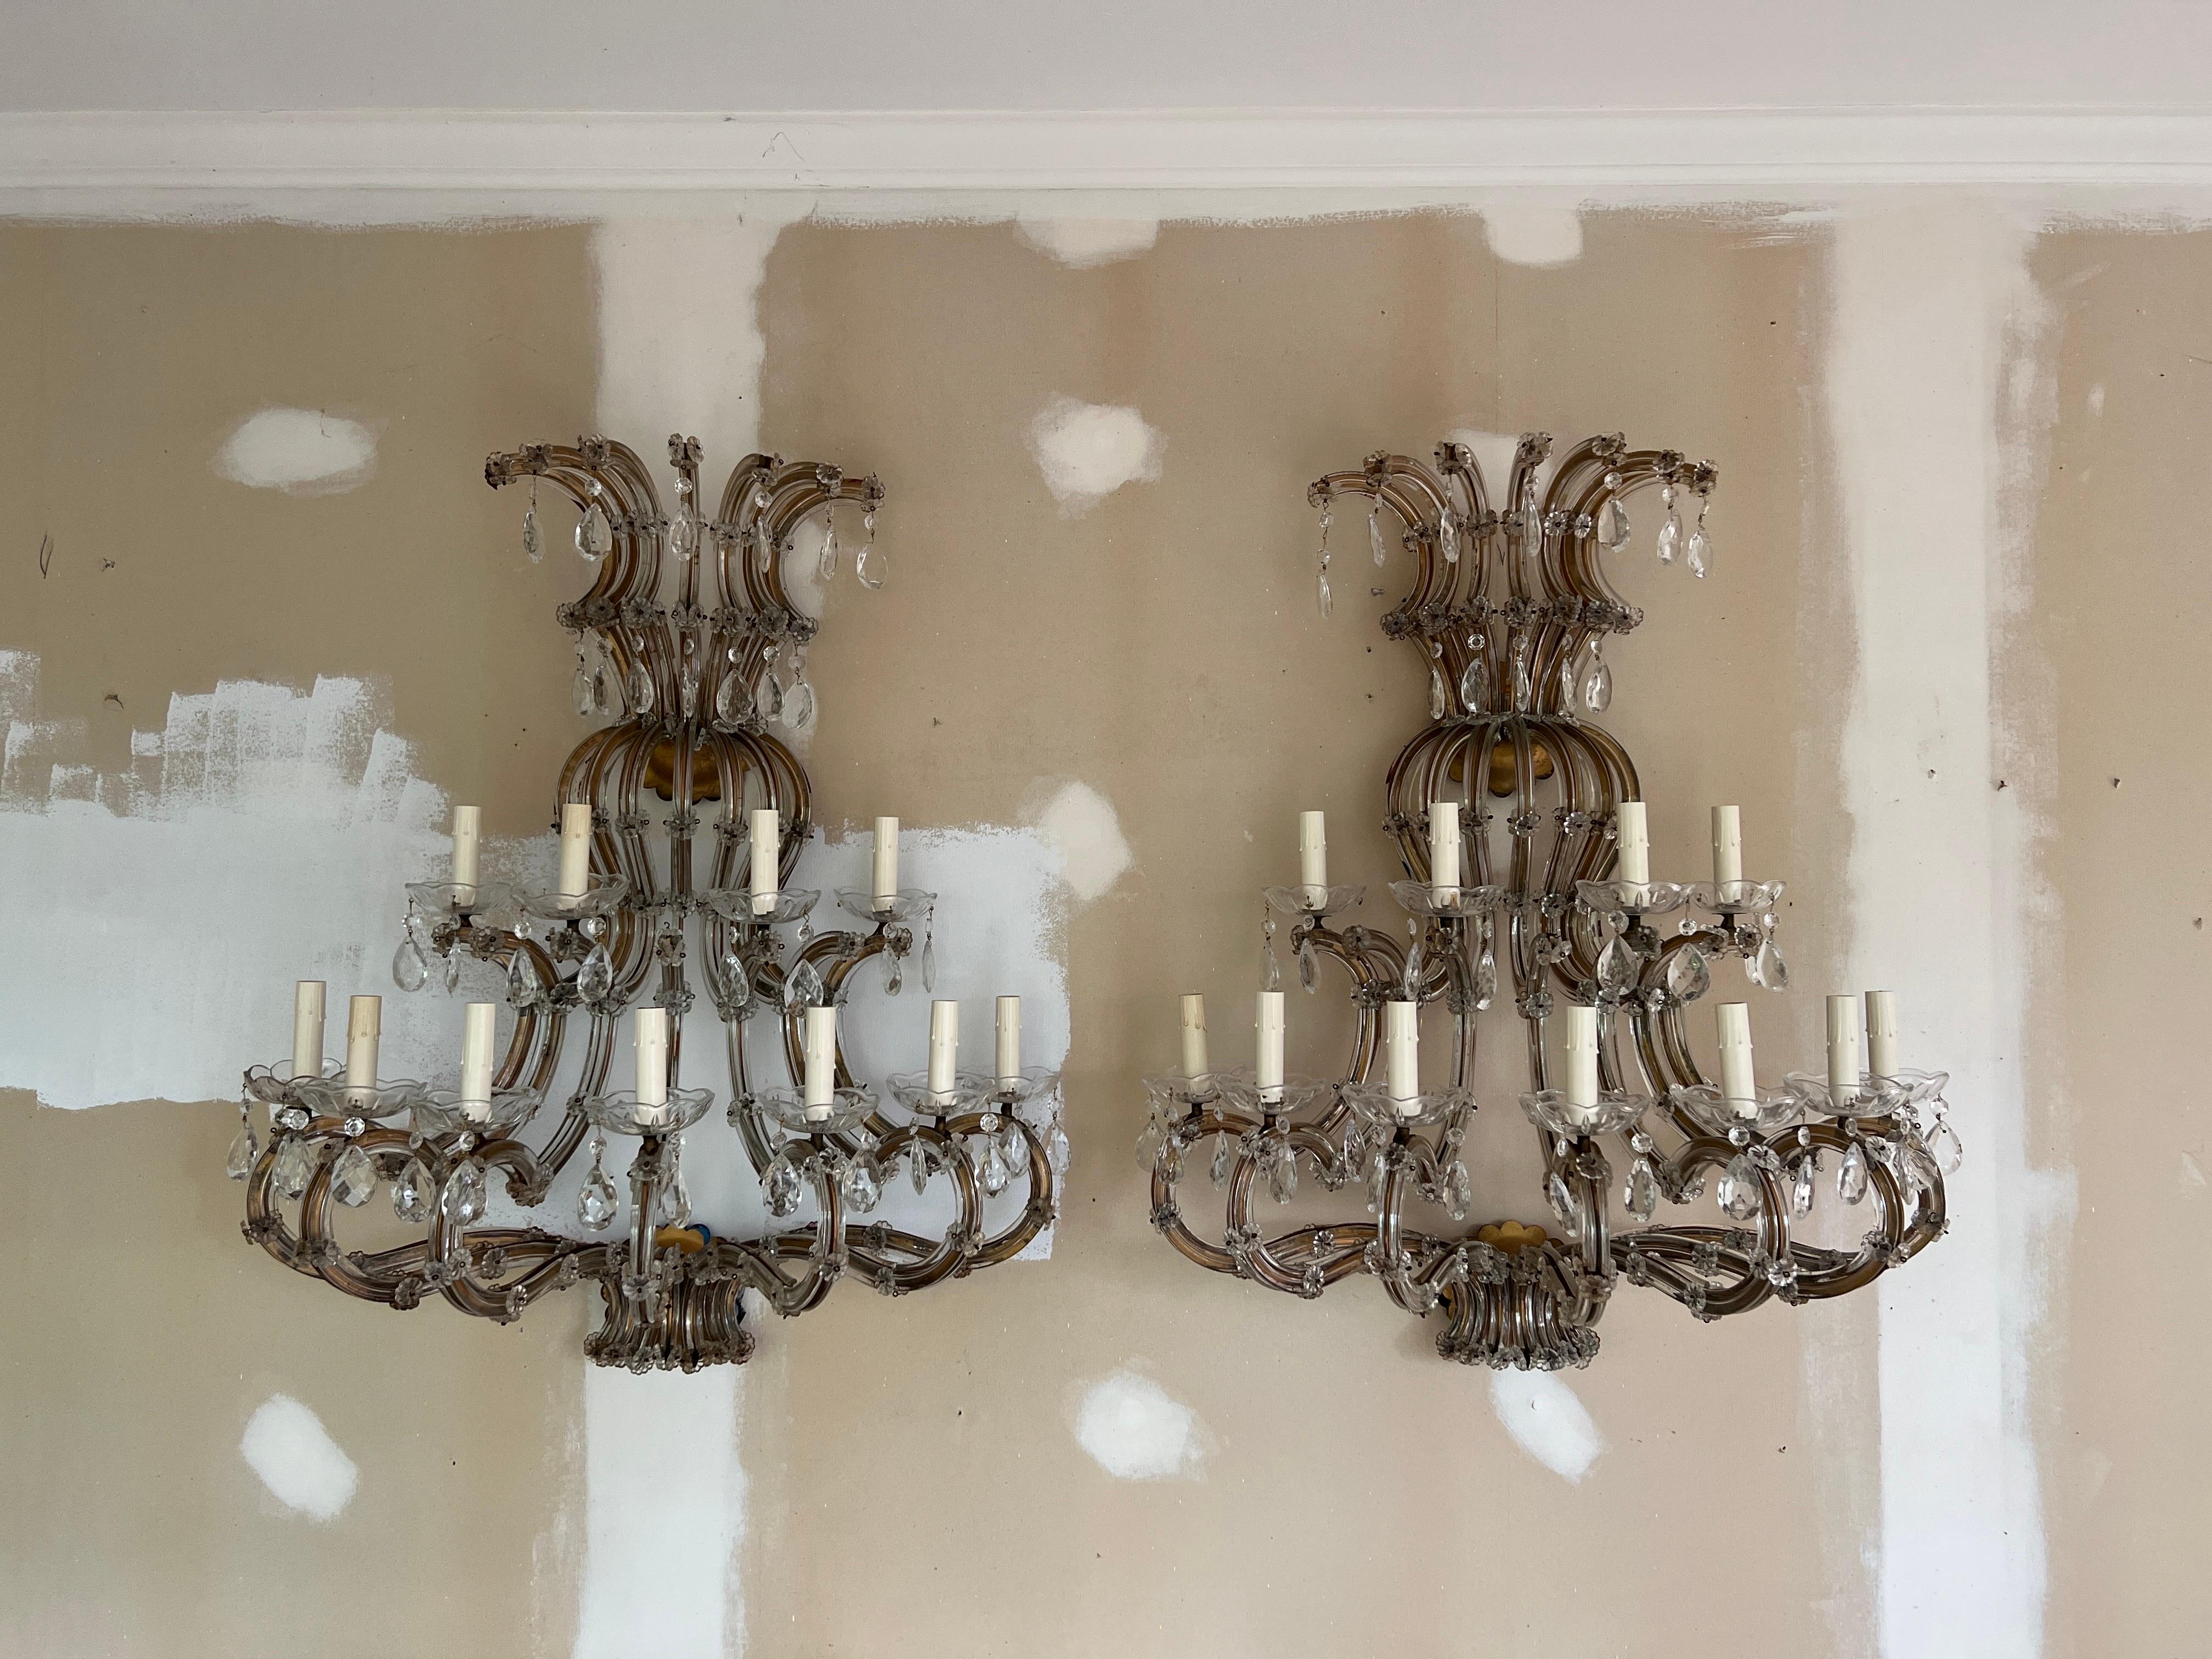 Exquisite Pair of Monumental Italian Maria Theresa 11-Light Crystal Wall Sconces

Elevate your space with a touch of opulence and grandeur through this Pair of Monumental Italian Maria Theresa Crystal Wall Sconces. These remarkable pieces epitomize